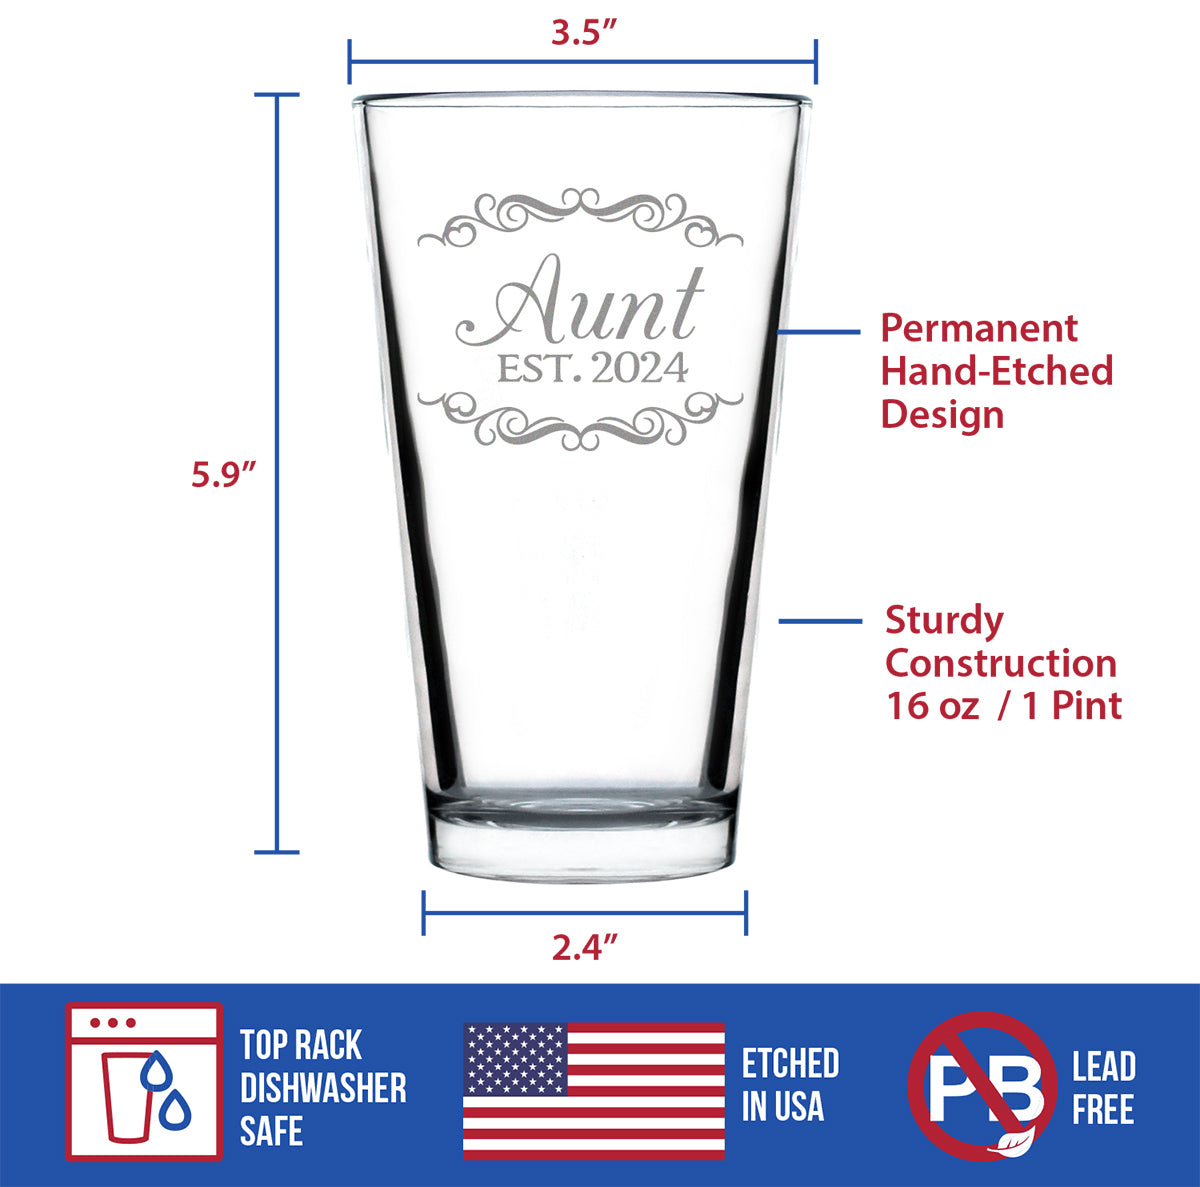 Aunt Est 2024 - New Aunties Pint Glass Gift for First Time Aunts - Decorative 16 Oz Glasses